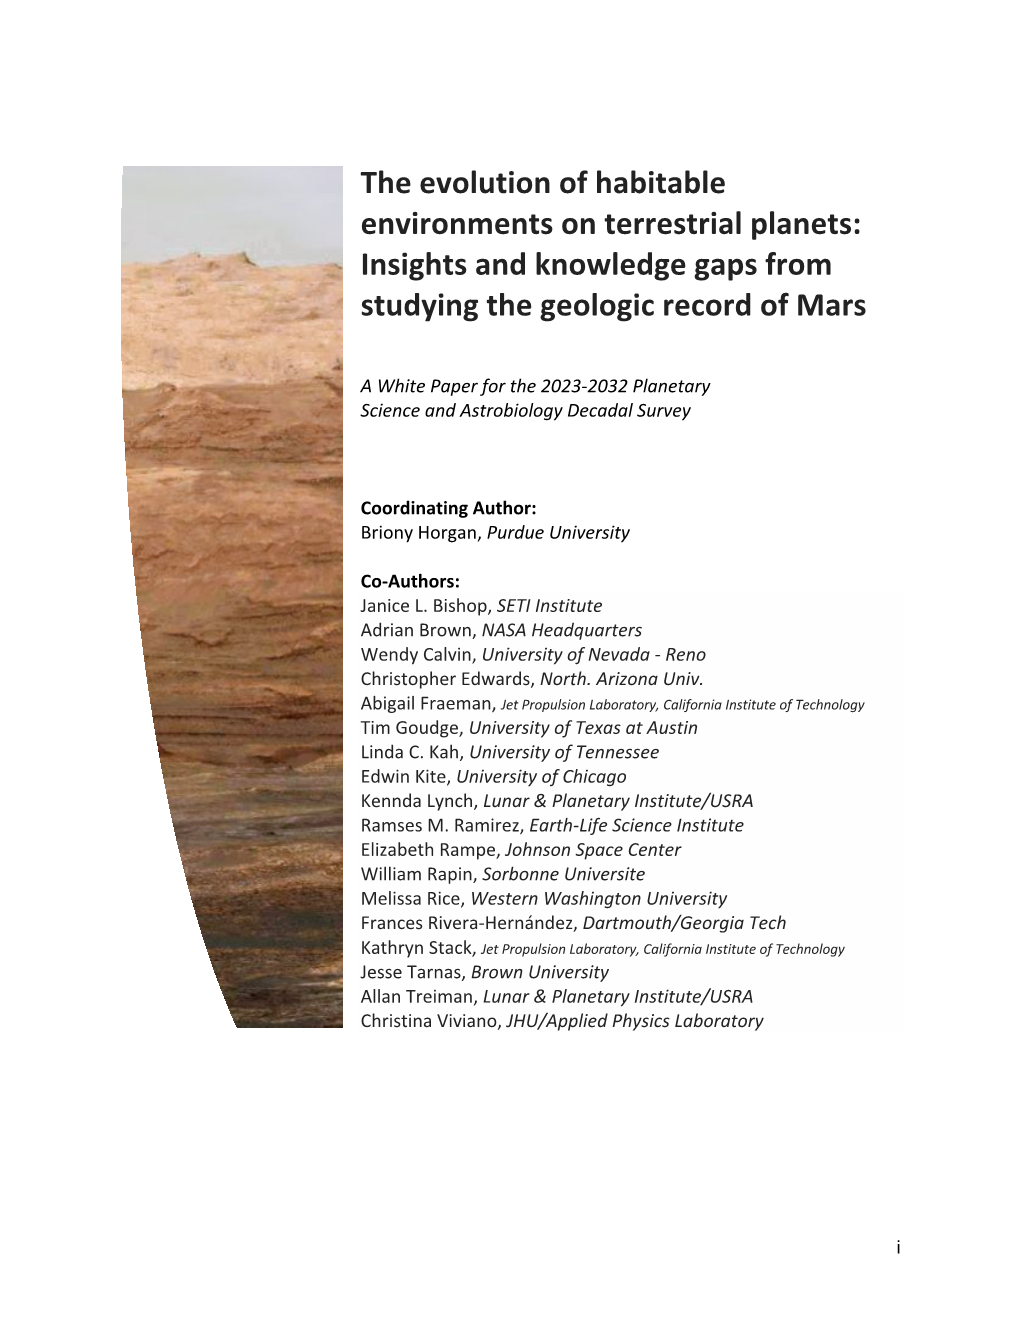 The Evolution of Habitable Environments on Terrestrial Planets: Insights and Knowledge Gaps from Studying the Geologic Record of Mars